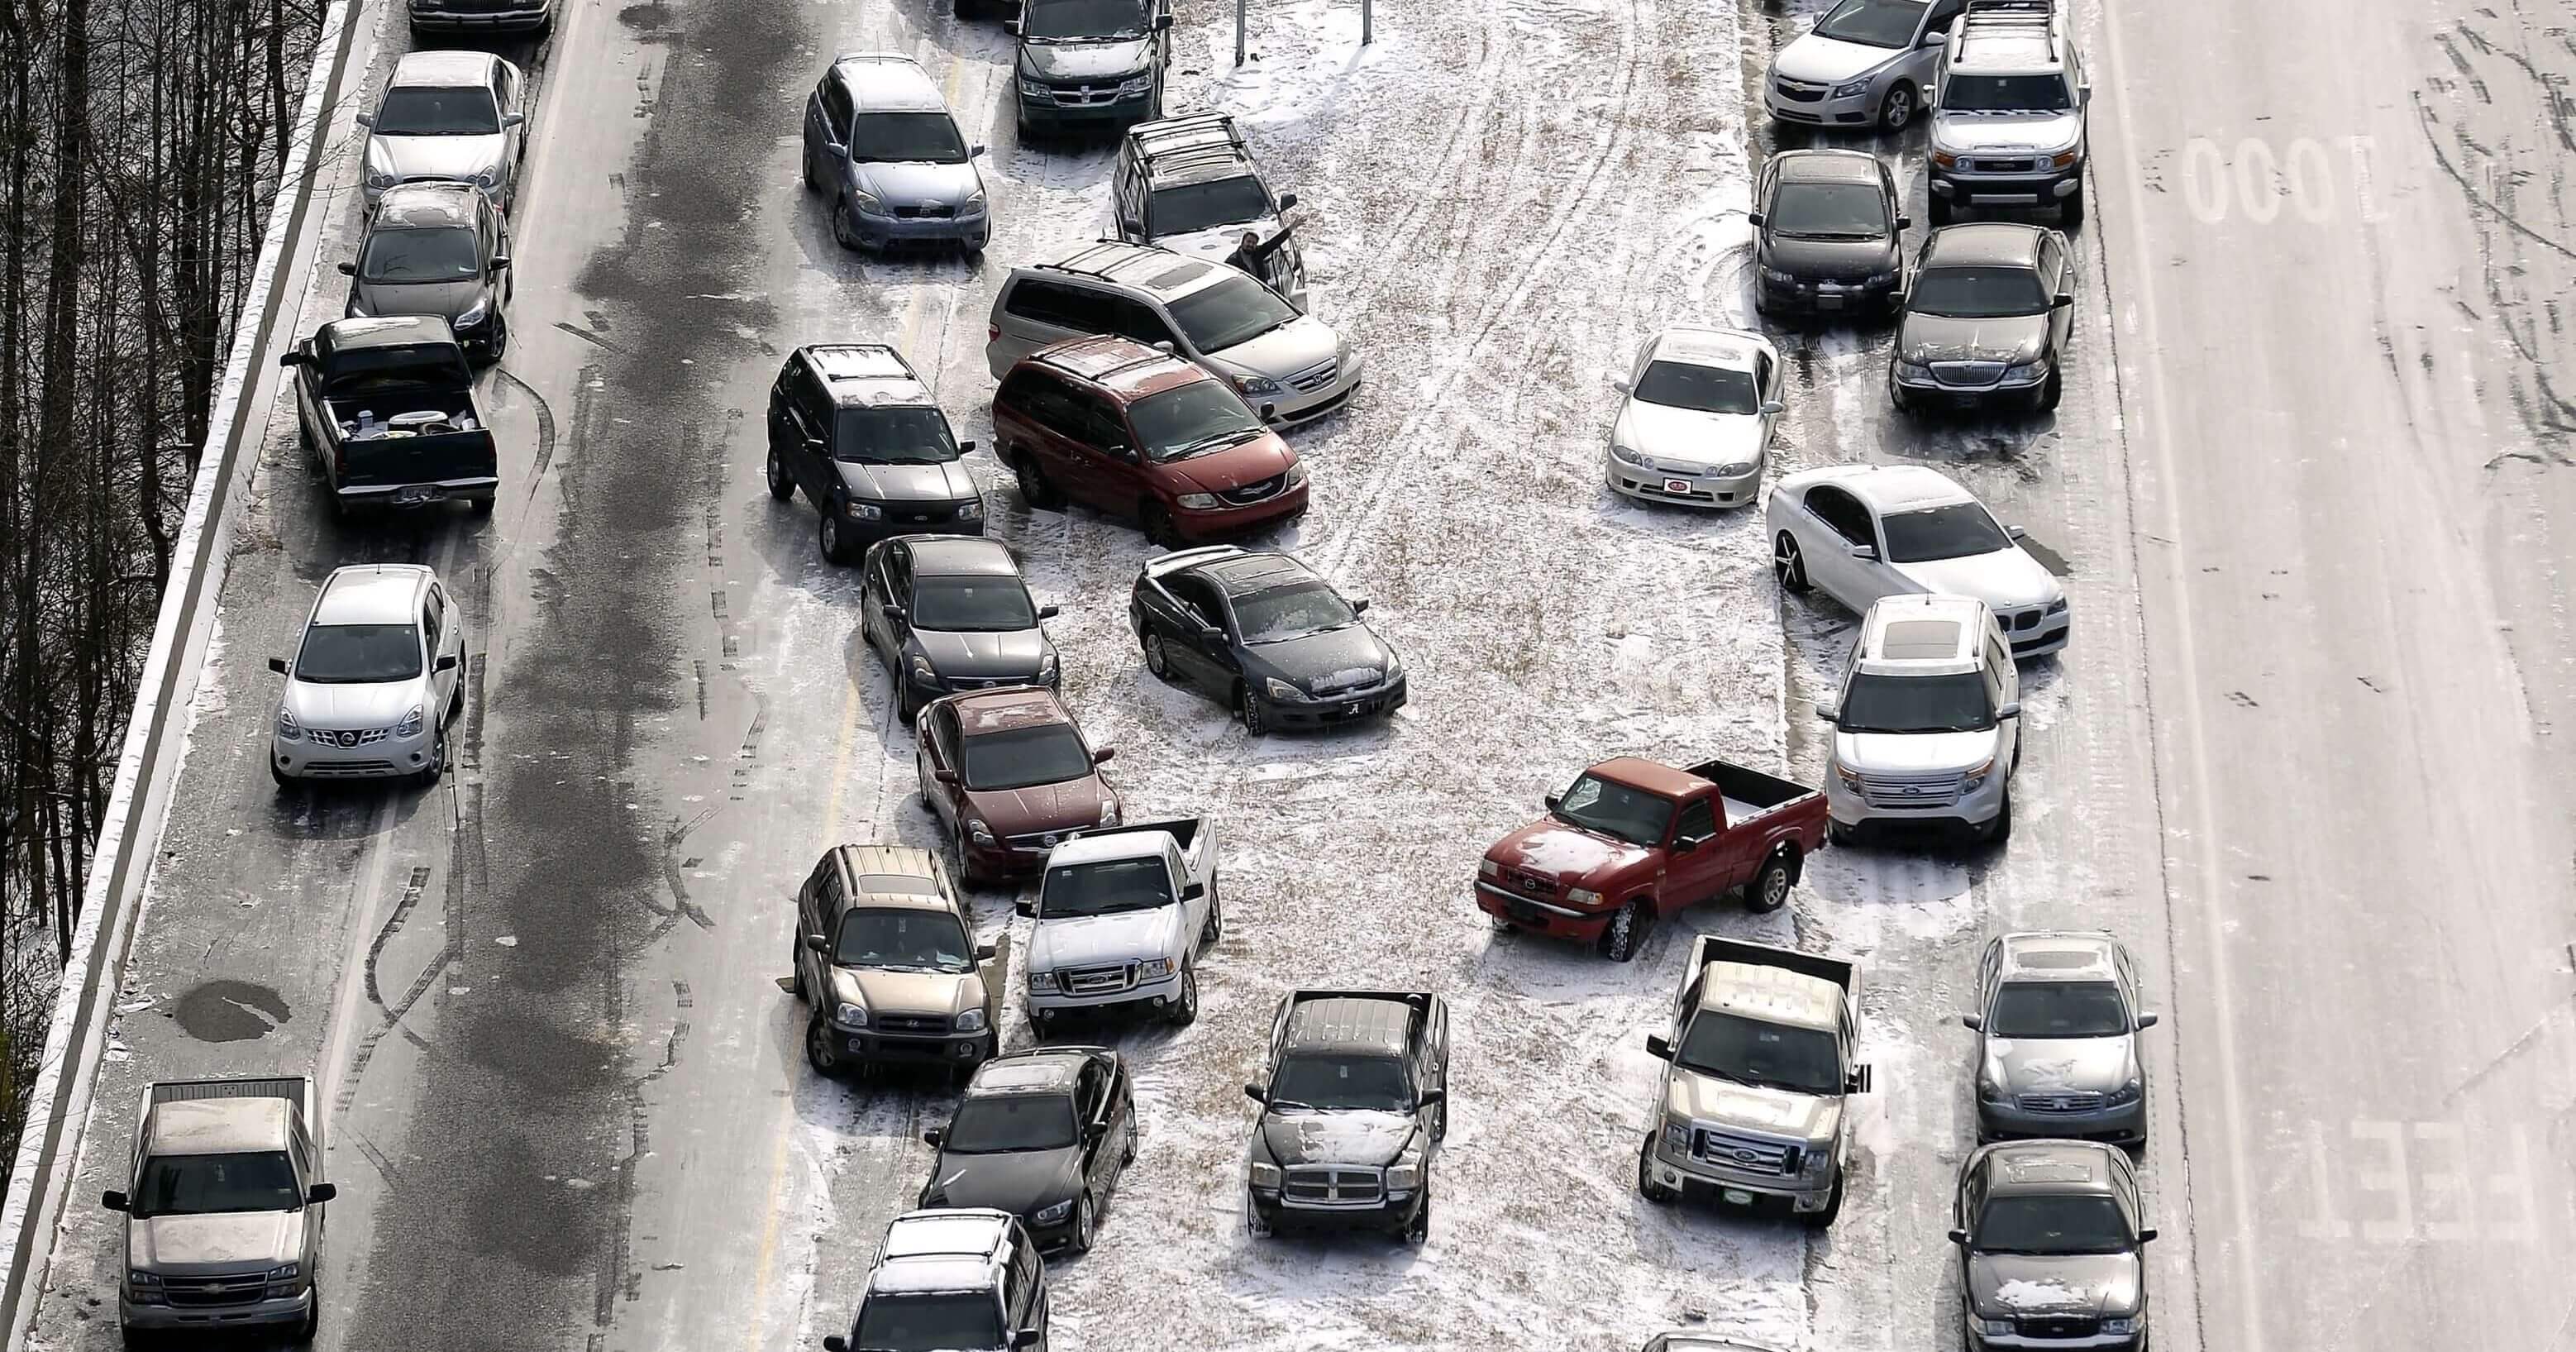 A Jan. 29, 2014, aerial photo shows abandoned cars at I-75 near the Chattahoochee River overpass piled up in the median of the ice-covered interstate after a winter snow storm in Atlanta.